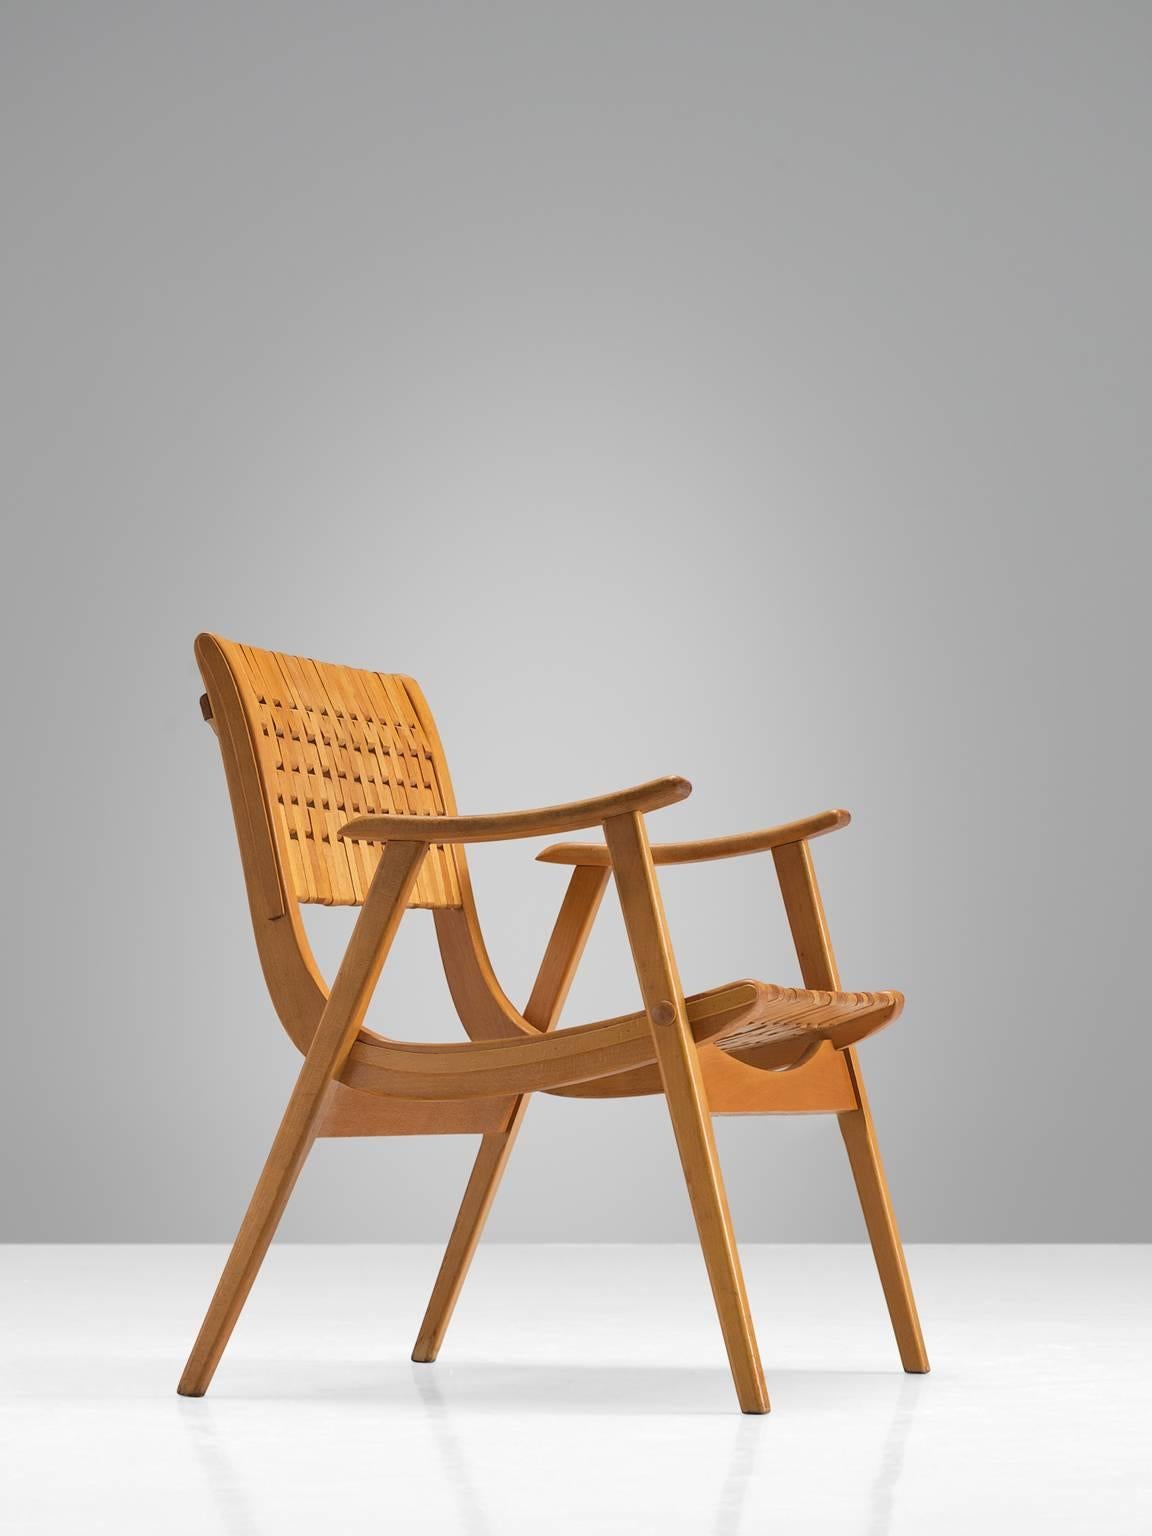 Erich Diekmann for Gelenka Tyskland, bent beech plywood, Germany, circa 1930.

This German chairs is designed by Erich Dieckmann designer who was affiliated to Bauhaus. The chair is executed with typical bent plywood and a webbed back. The style is